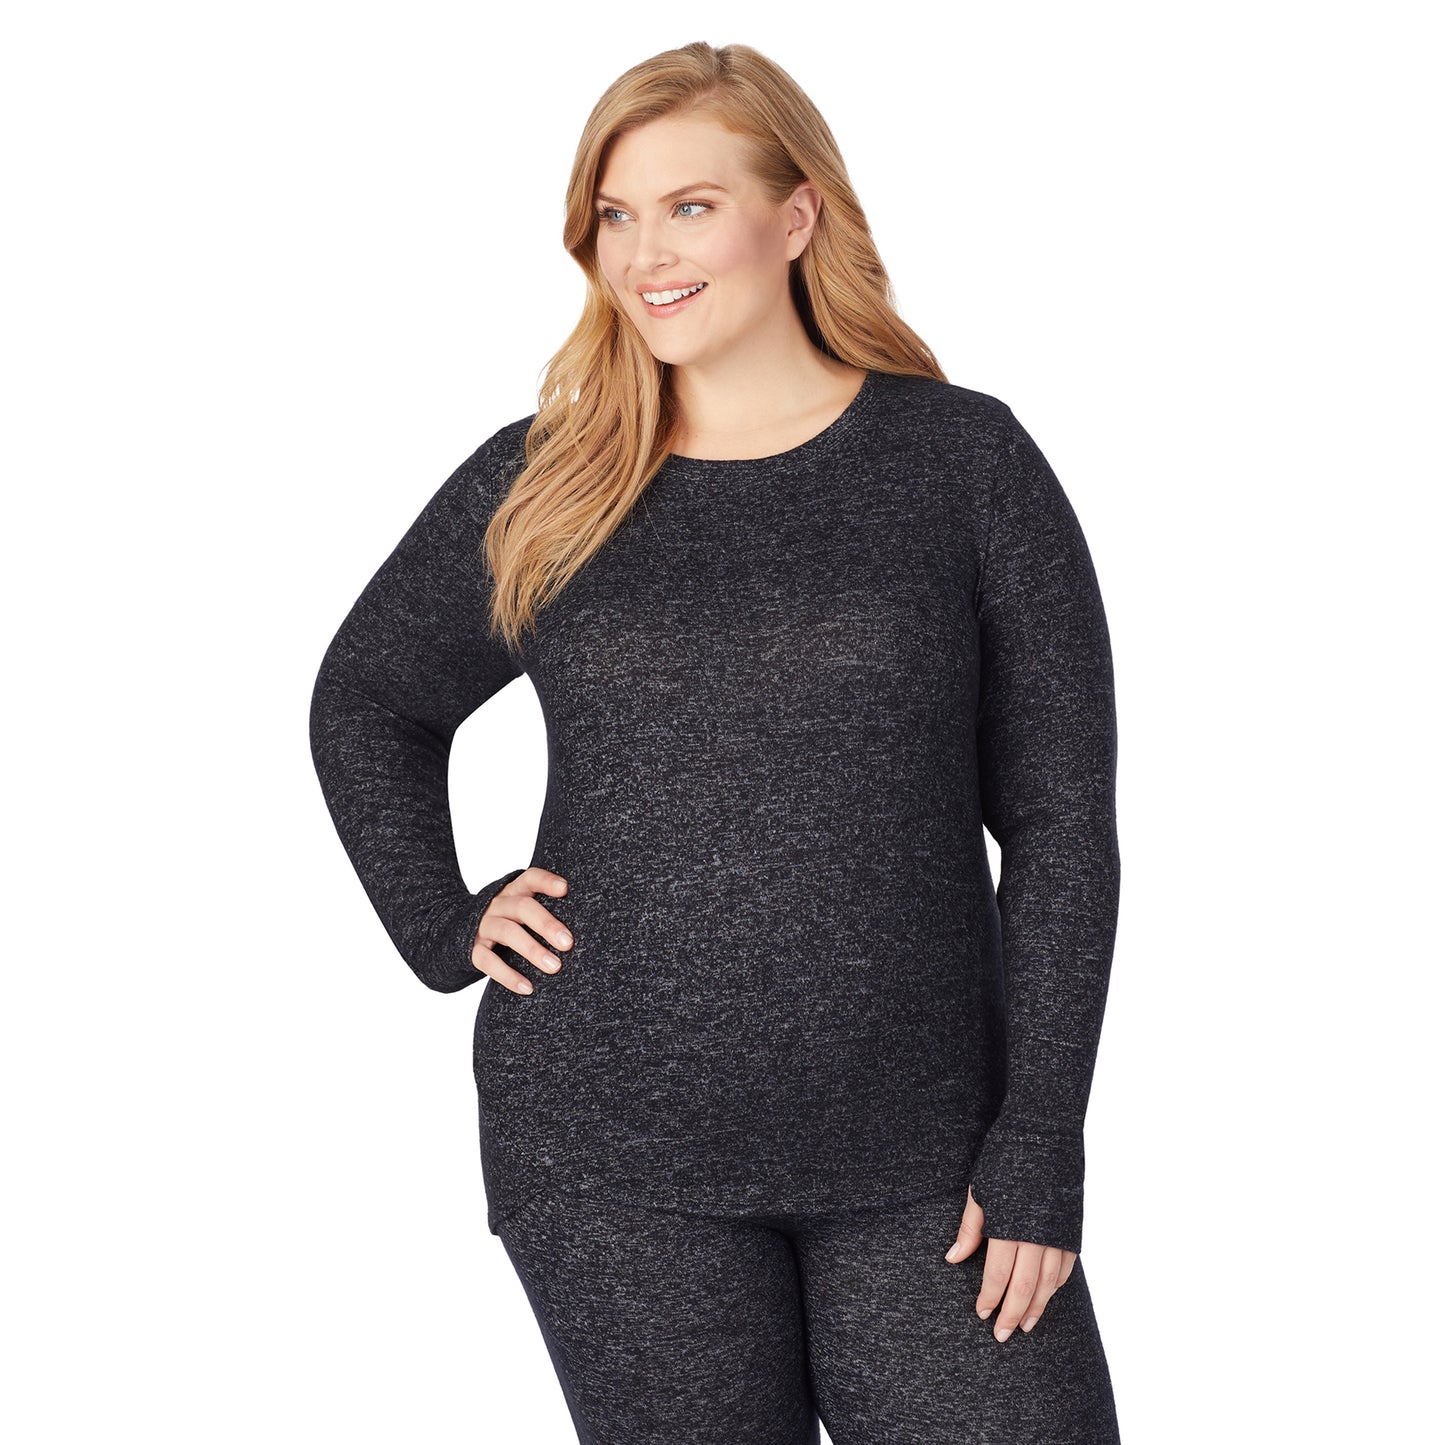 Marled Dark Charcoal; Model is wearing size 1X. She is 5'9", Bust 38", Waist 36", Hips 48.5". @A lady wearing a marled dark charcoal long sleeve crew plus.